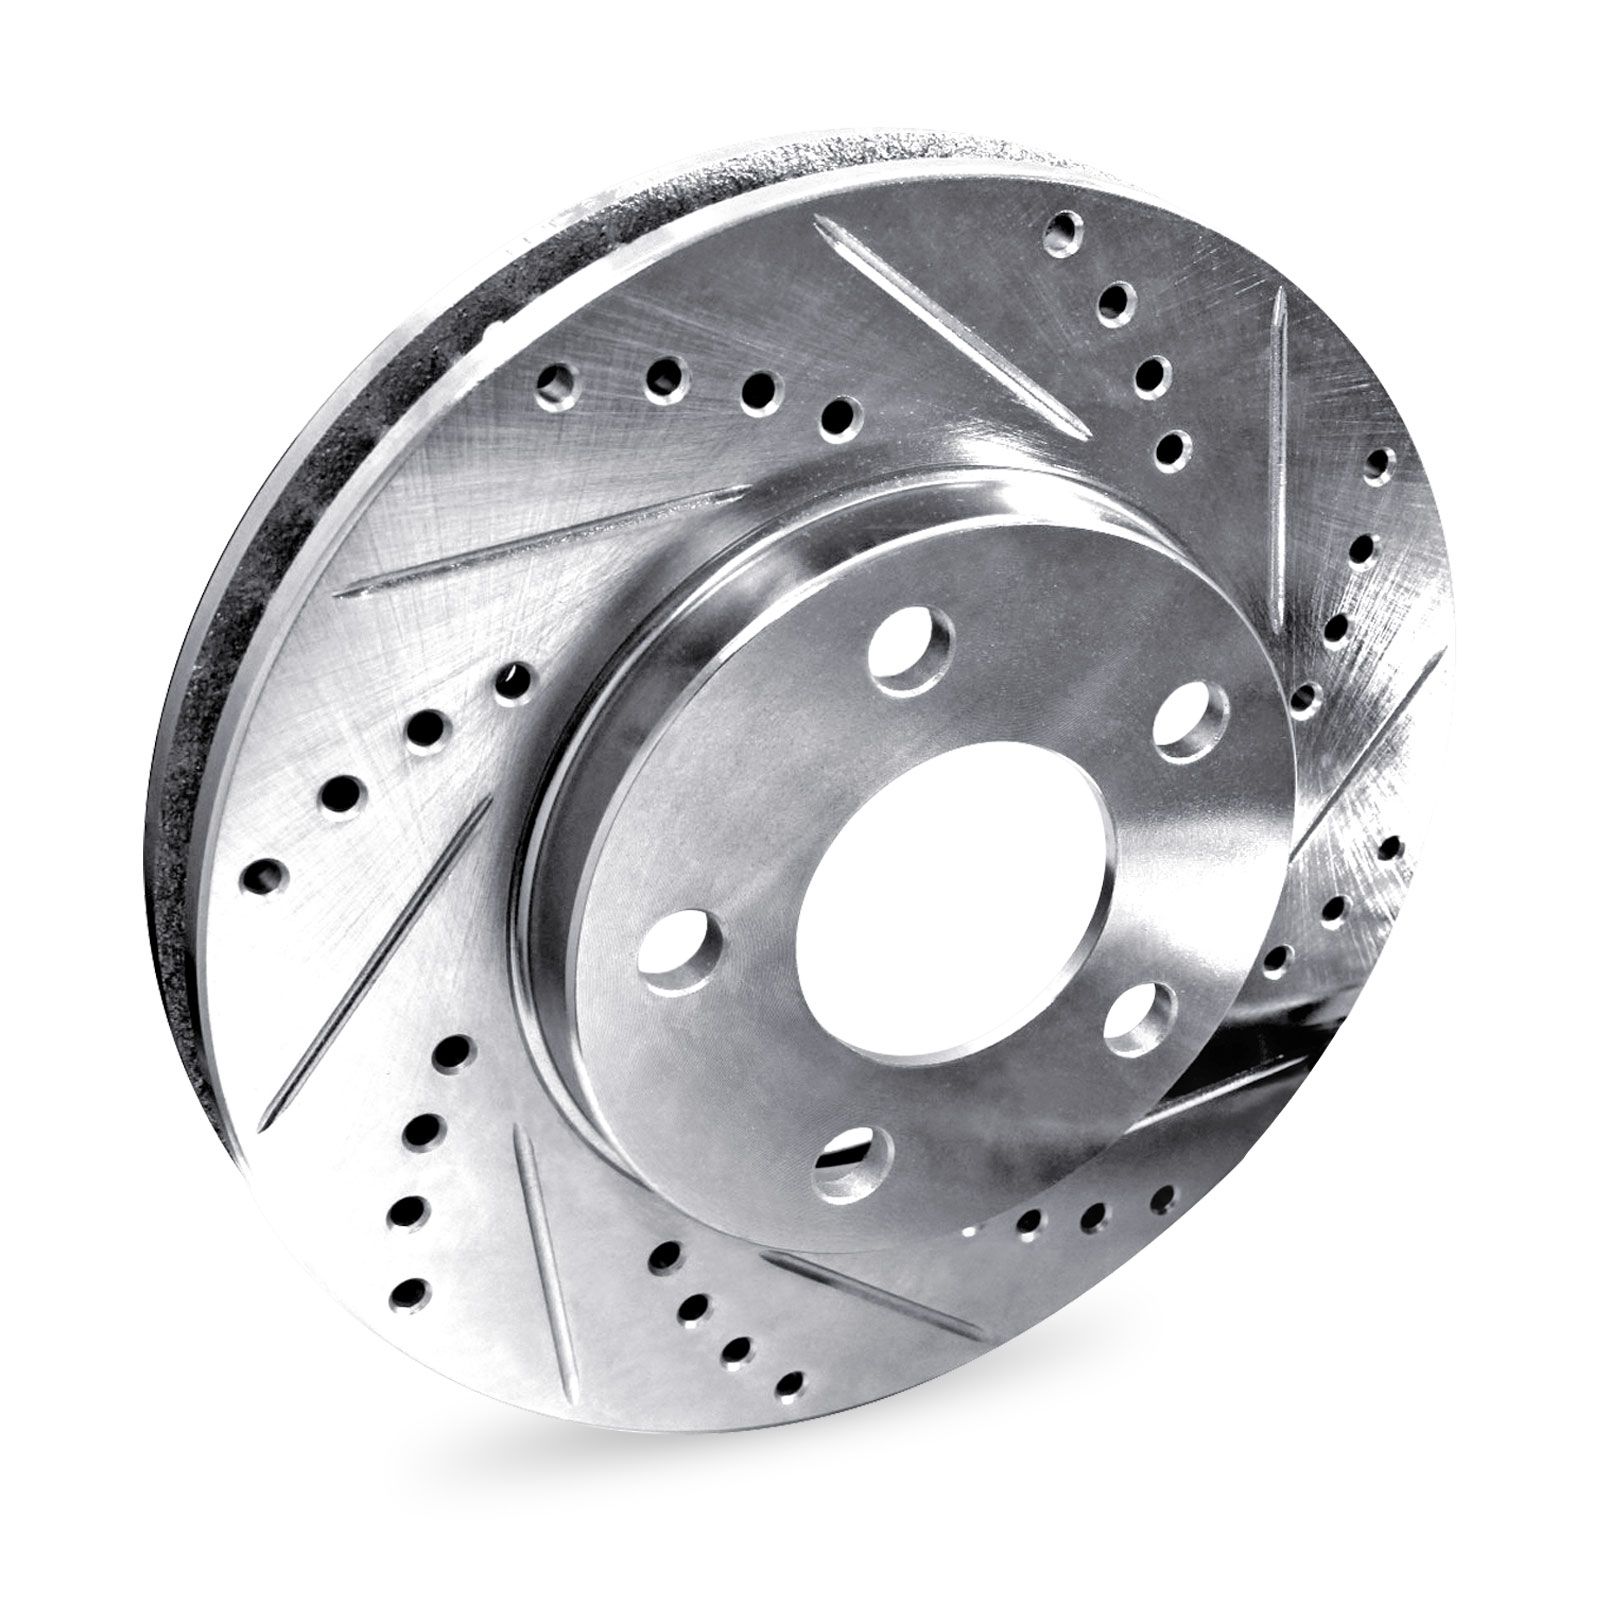 R1 Concepts For ES300, Camry, Avalon, Sienna Front Drill/Slot Brake Rotors+Semi-Met Pads